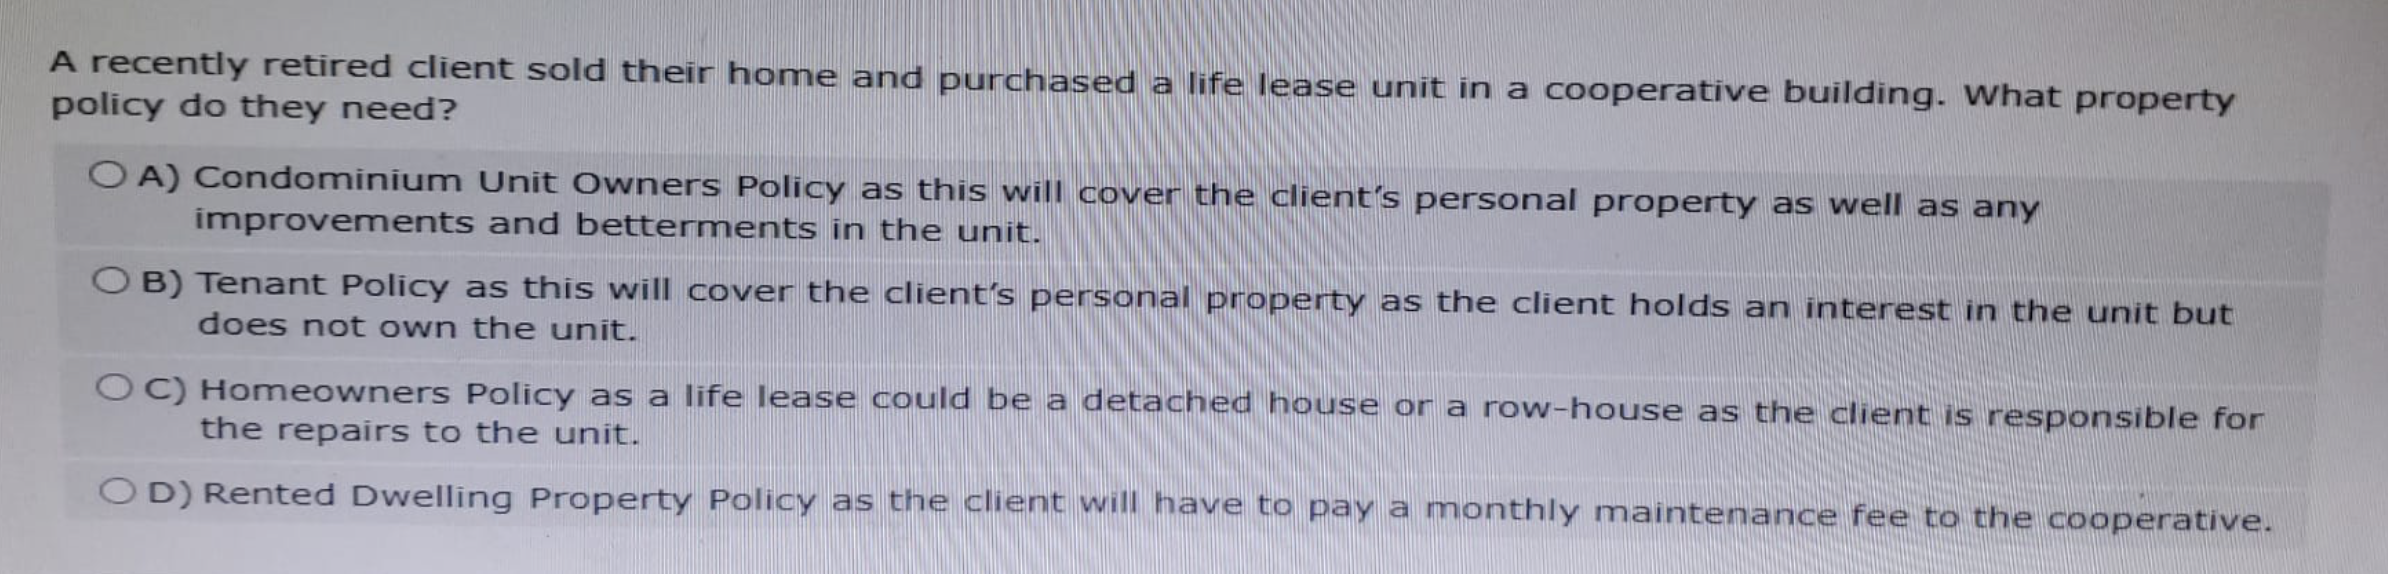 A recently retired client sold their home and purchased a life lease unit in a cooperative building. What property
policy do they need?
OA) Condominium Unit Owners Policy as this will cover the client's personal property as well as any
improvements and betterments in the unit.
OB) Tenant Policy as this will cover the client's personal property as the client holds an interest in the unit but
does not own the unit.
OC) Homeowners Policy as a life lease could be a detached house or a row-house as the client is responsible for
the repairs to the unit.
OD) Rented Dwelling Property Policy as the client will have to pay a monthly maintenance fee to the cooperative.